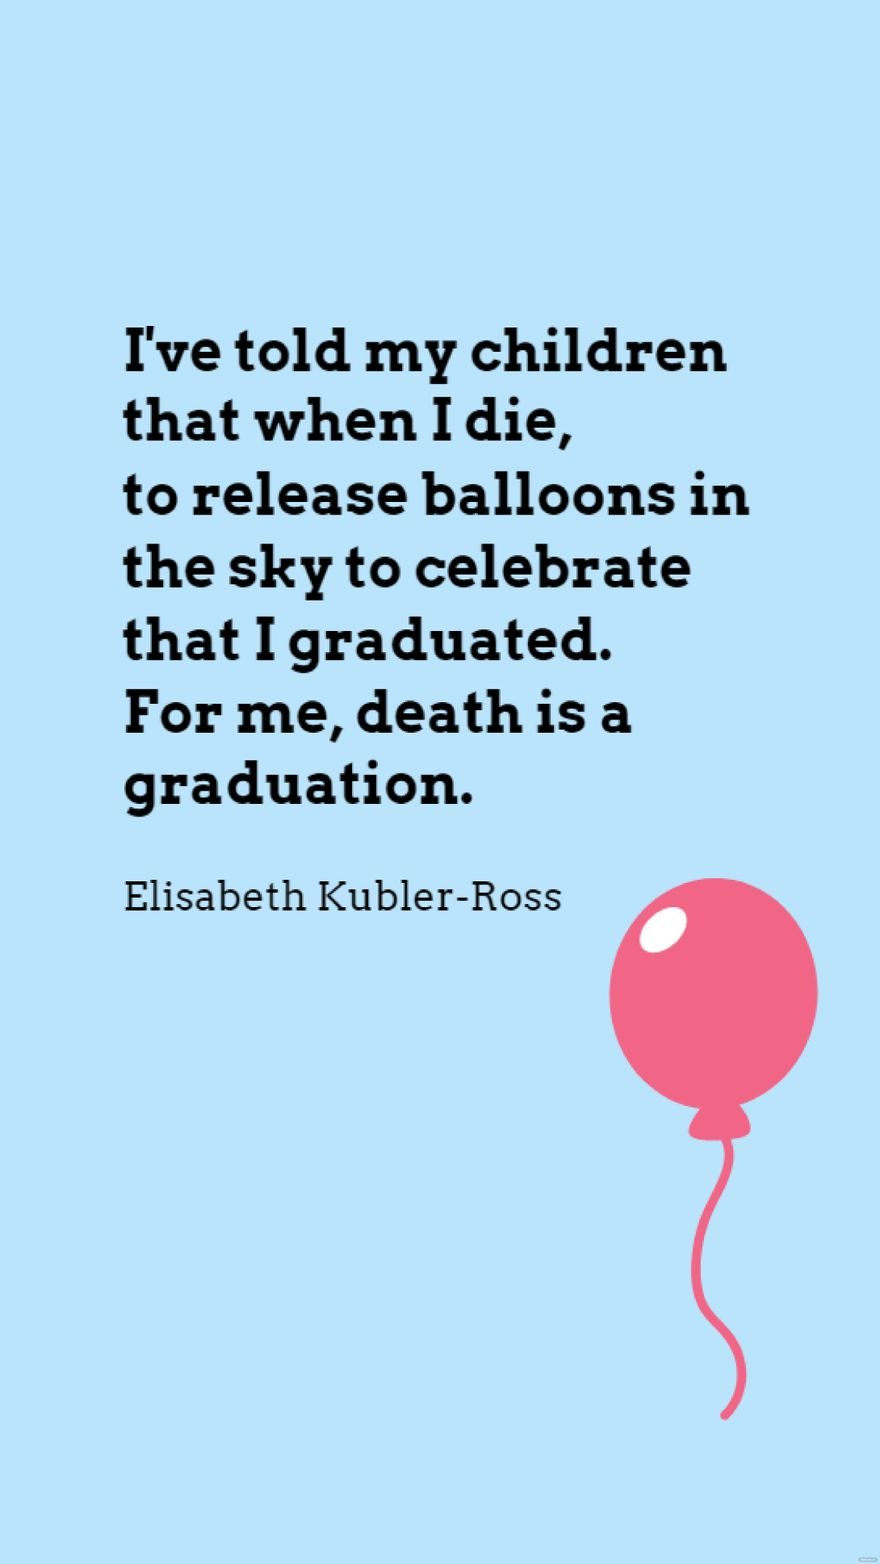 Elisabeth Kubler-Ross - I've told my children that when I die, to release balloons in the sky to celebrate that I graduated. For me, death is a graduation.